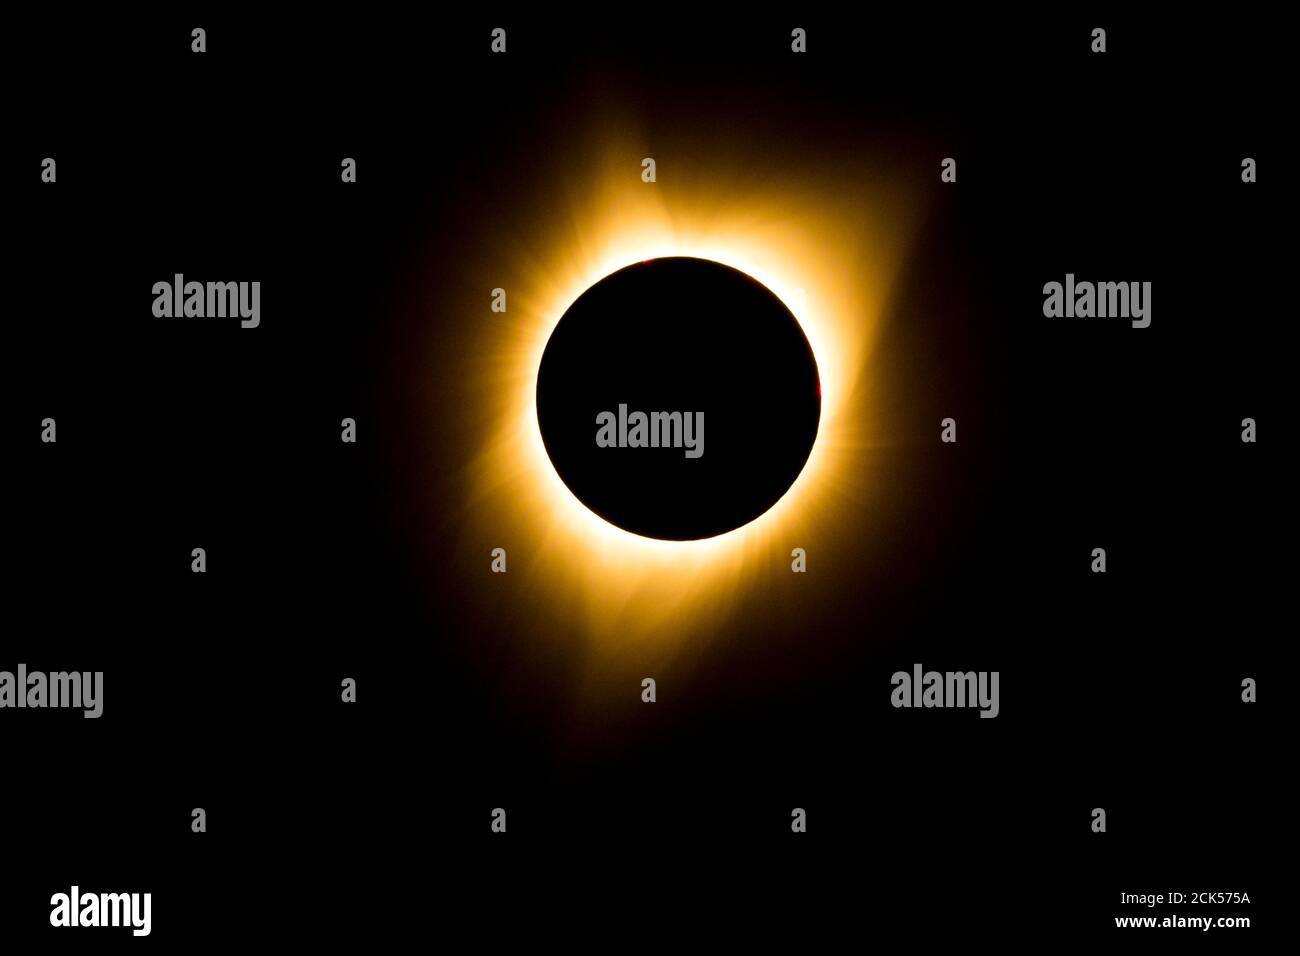 The sun's corona envelops the moon in this total solar eclipse viewed from Oregon, USA. Stock Photo